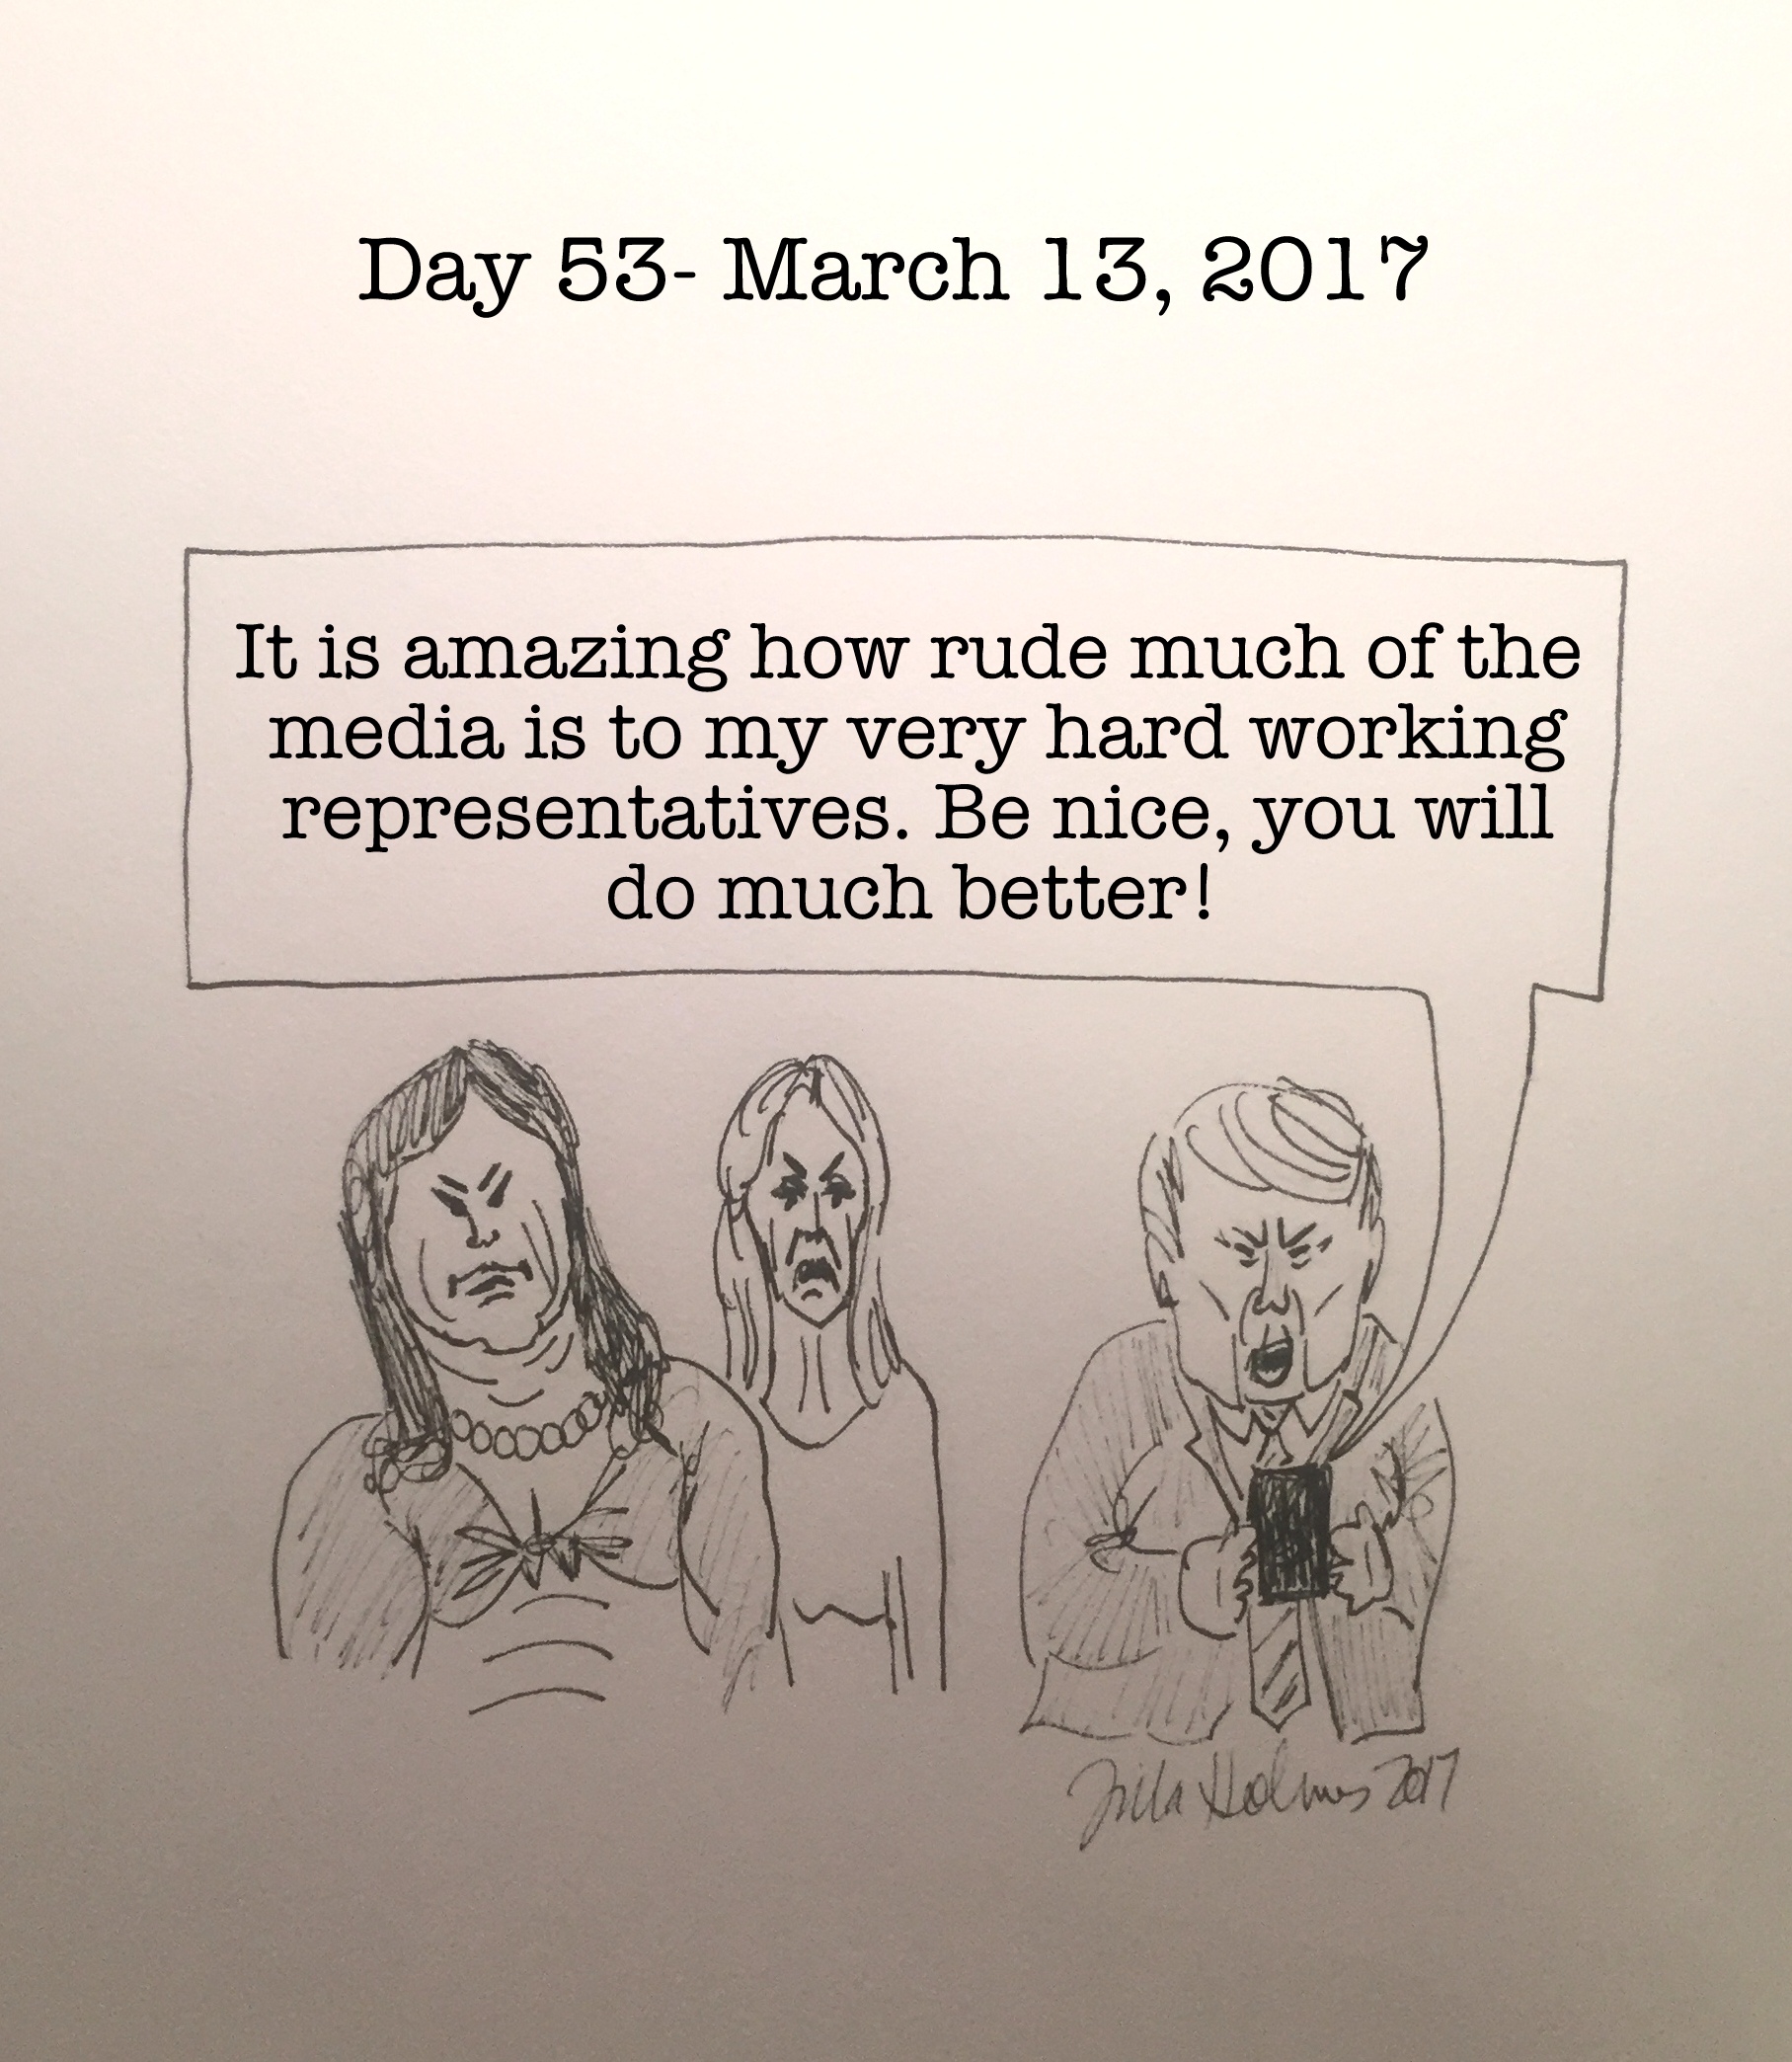 Day 53- March 13, 2017- Copyright 2017